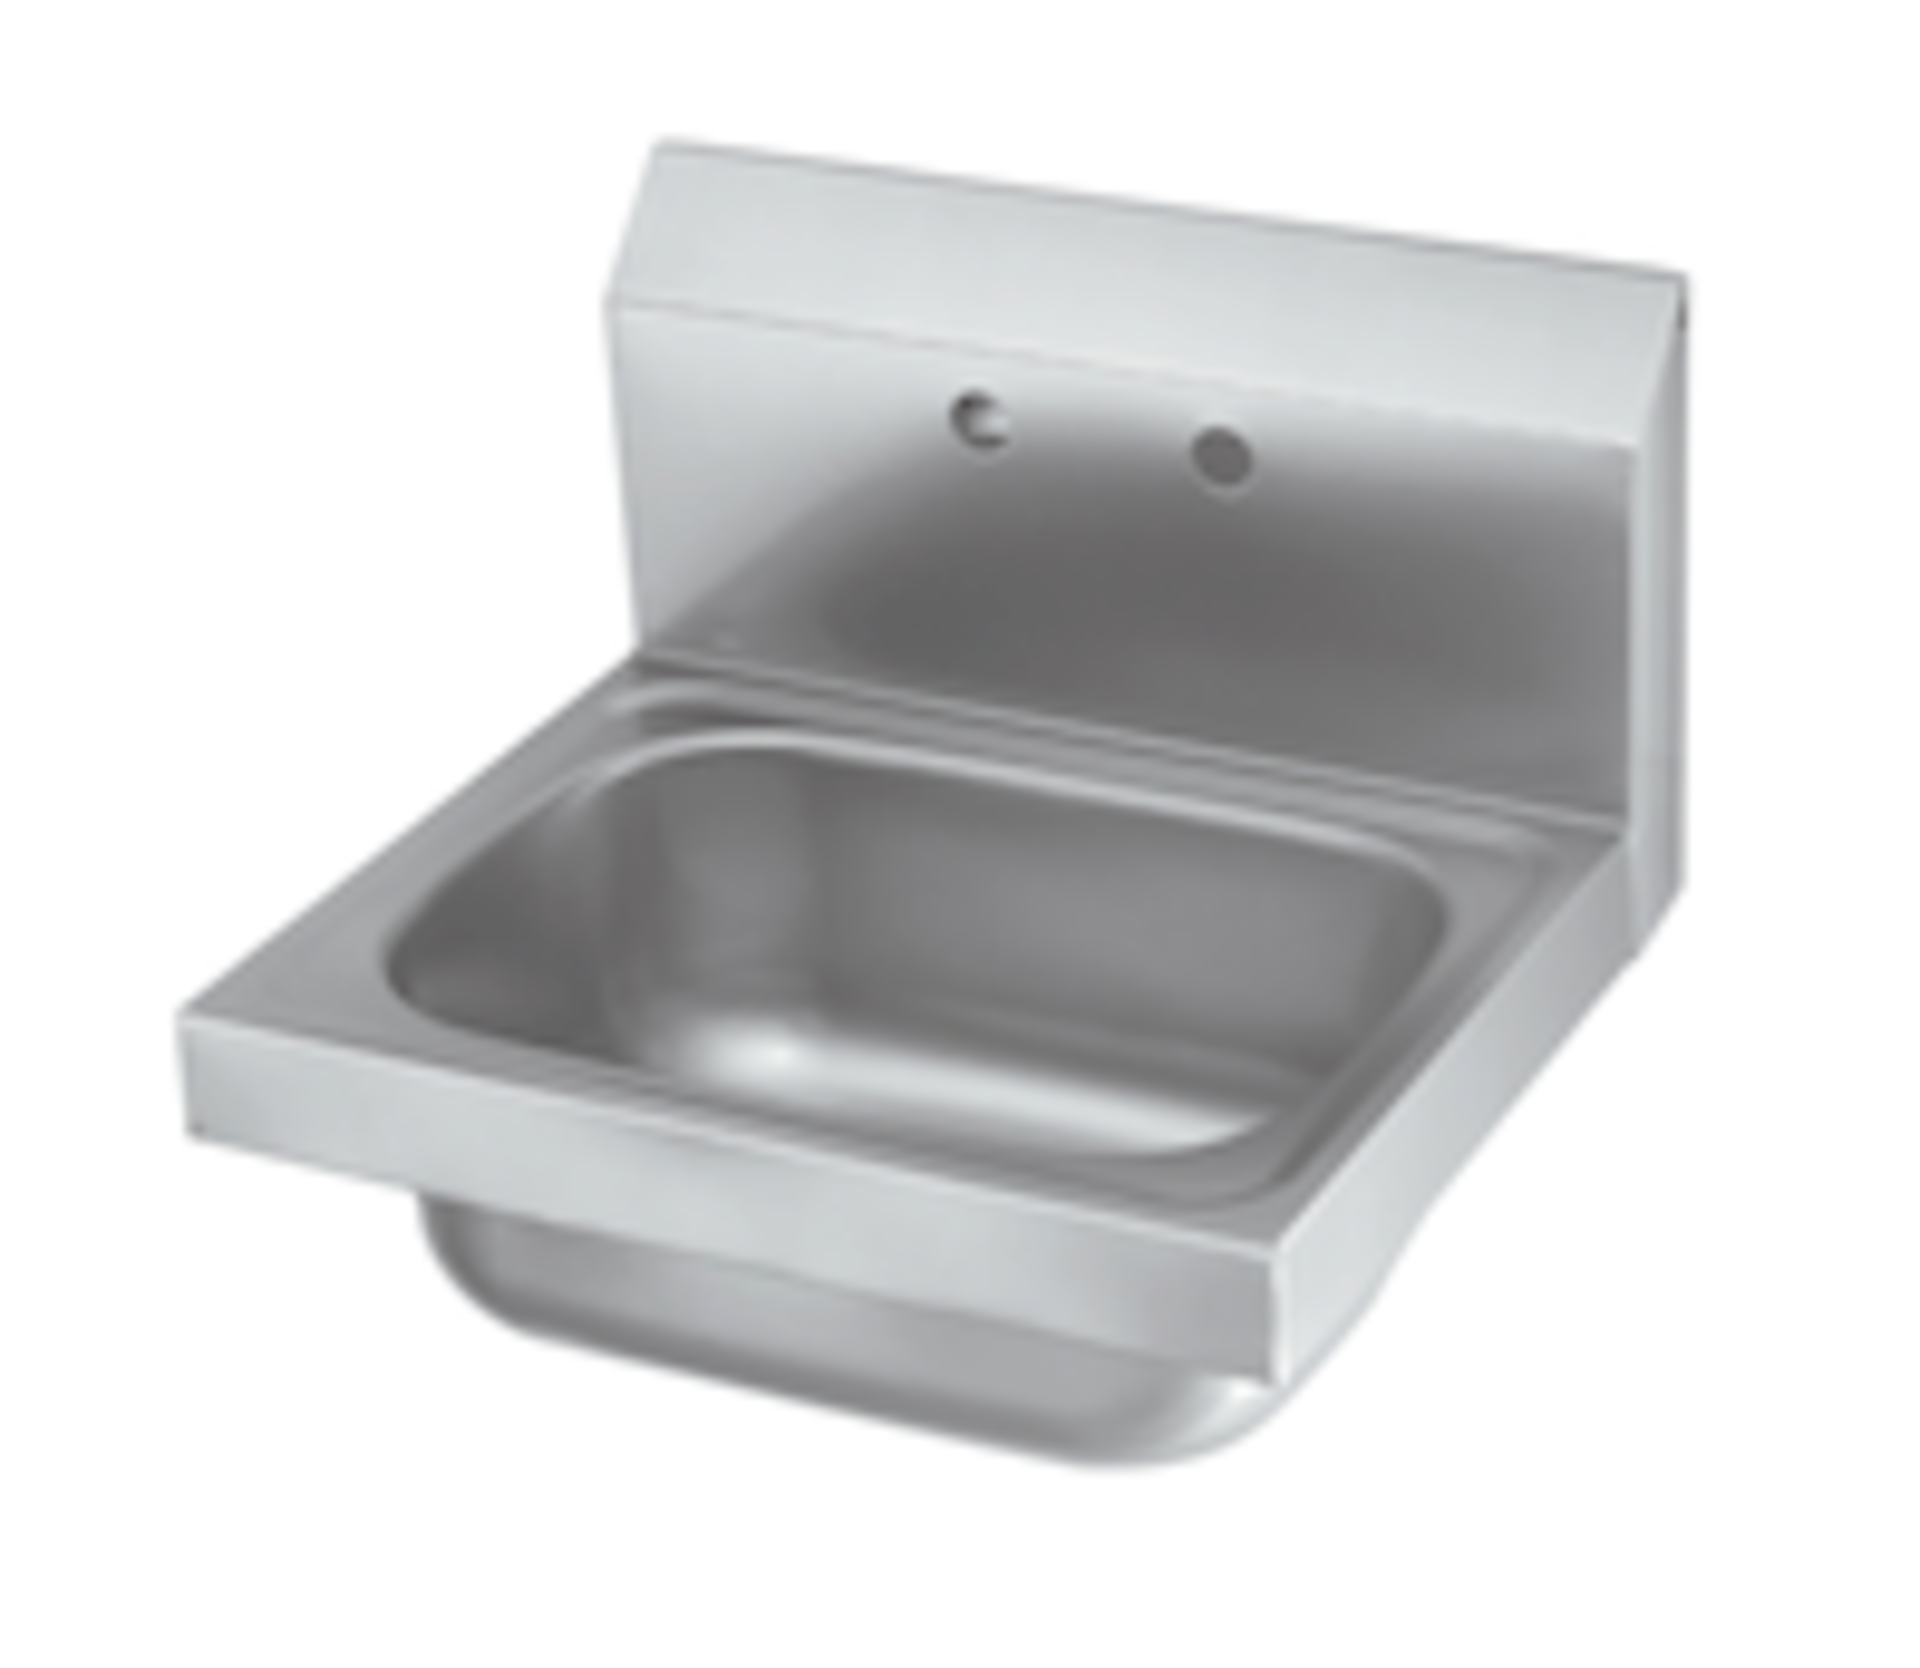 20GA.304S/S space saver hand sink with 9*9*5 drawing bowl 18GA.304S/S wall mounted clip 1.5" drain